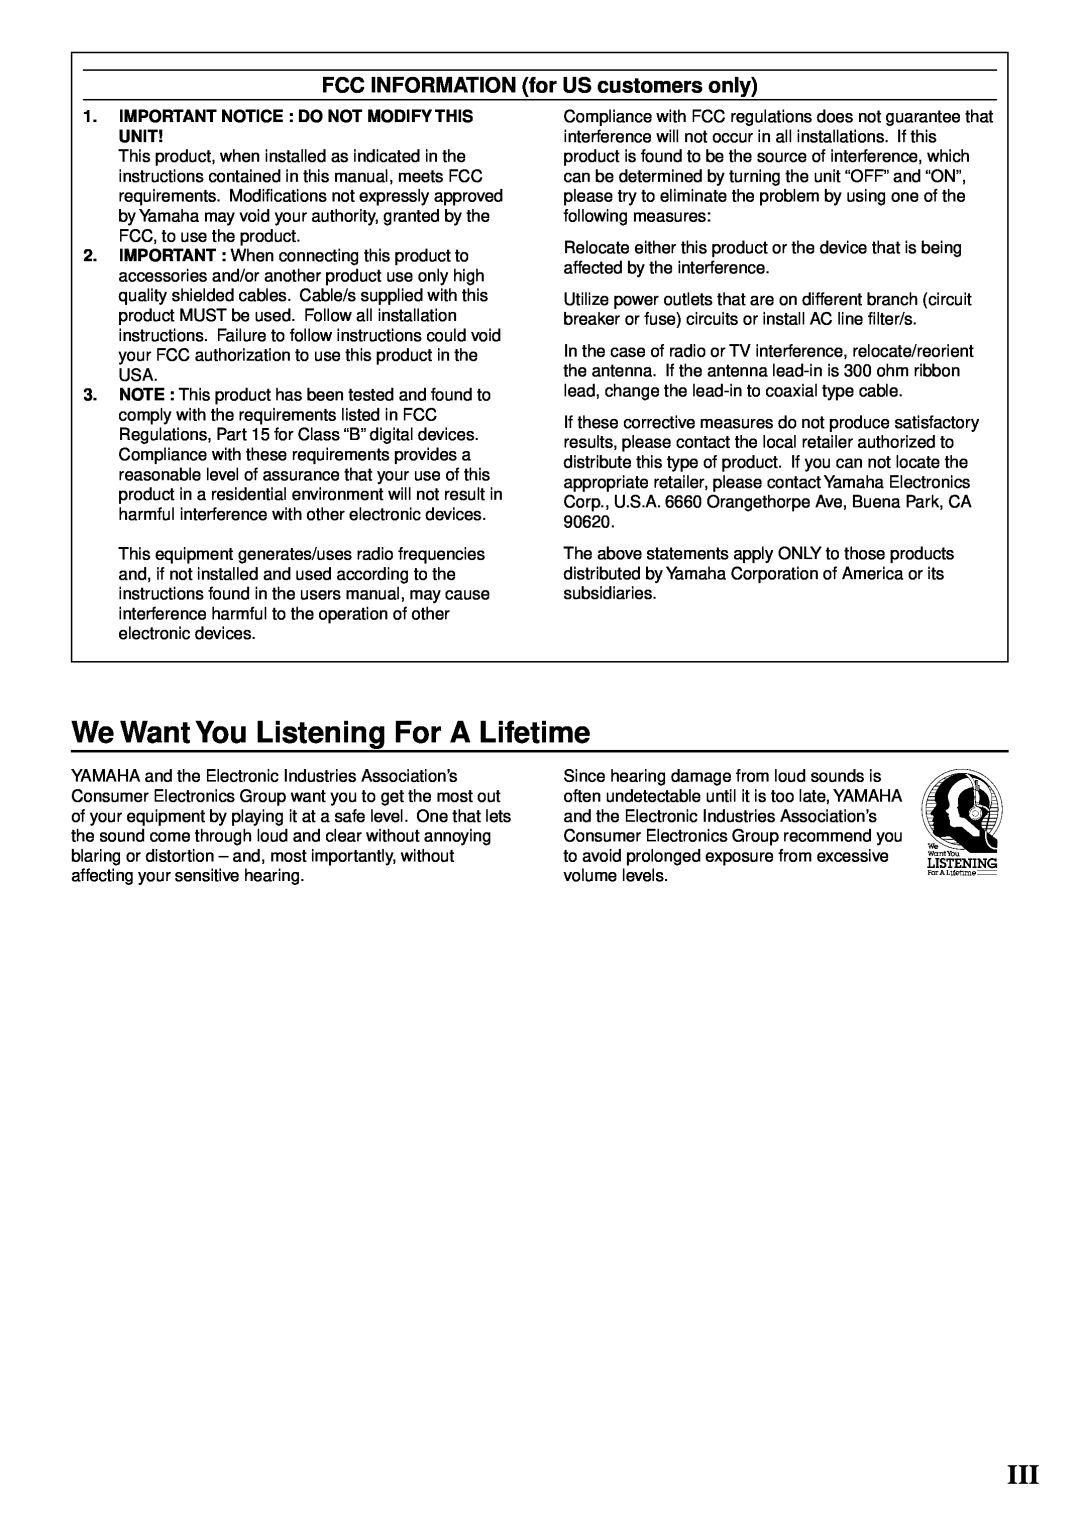 Yamaha NS-P220 owner manual We Want You Listening For A Lifetime, FCC INFORMATION for US customers only, Unit 